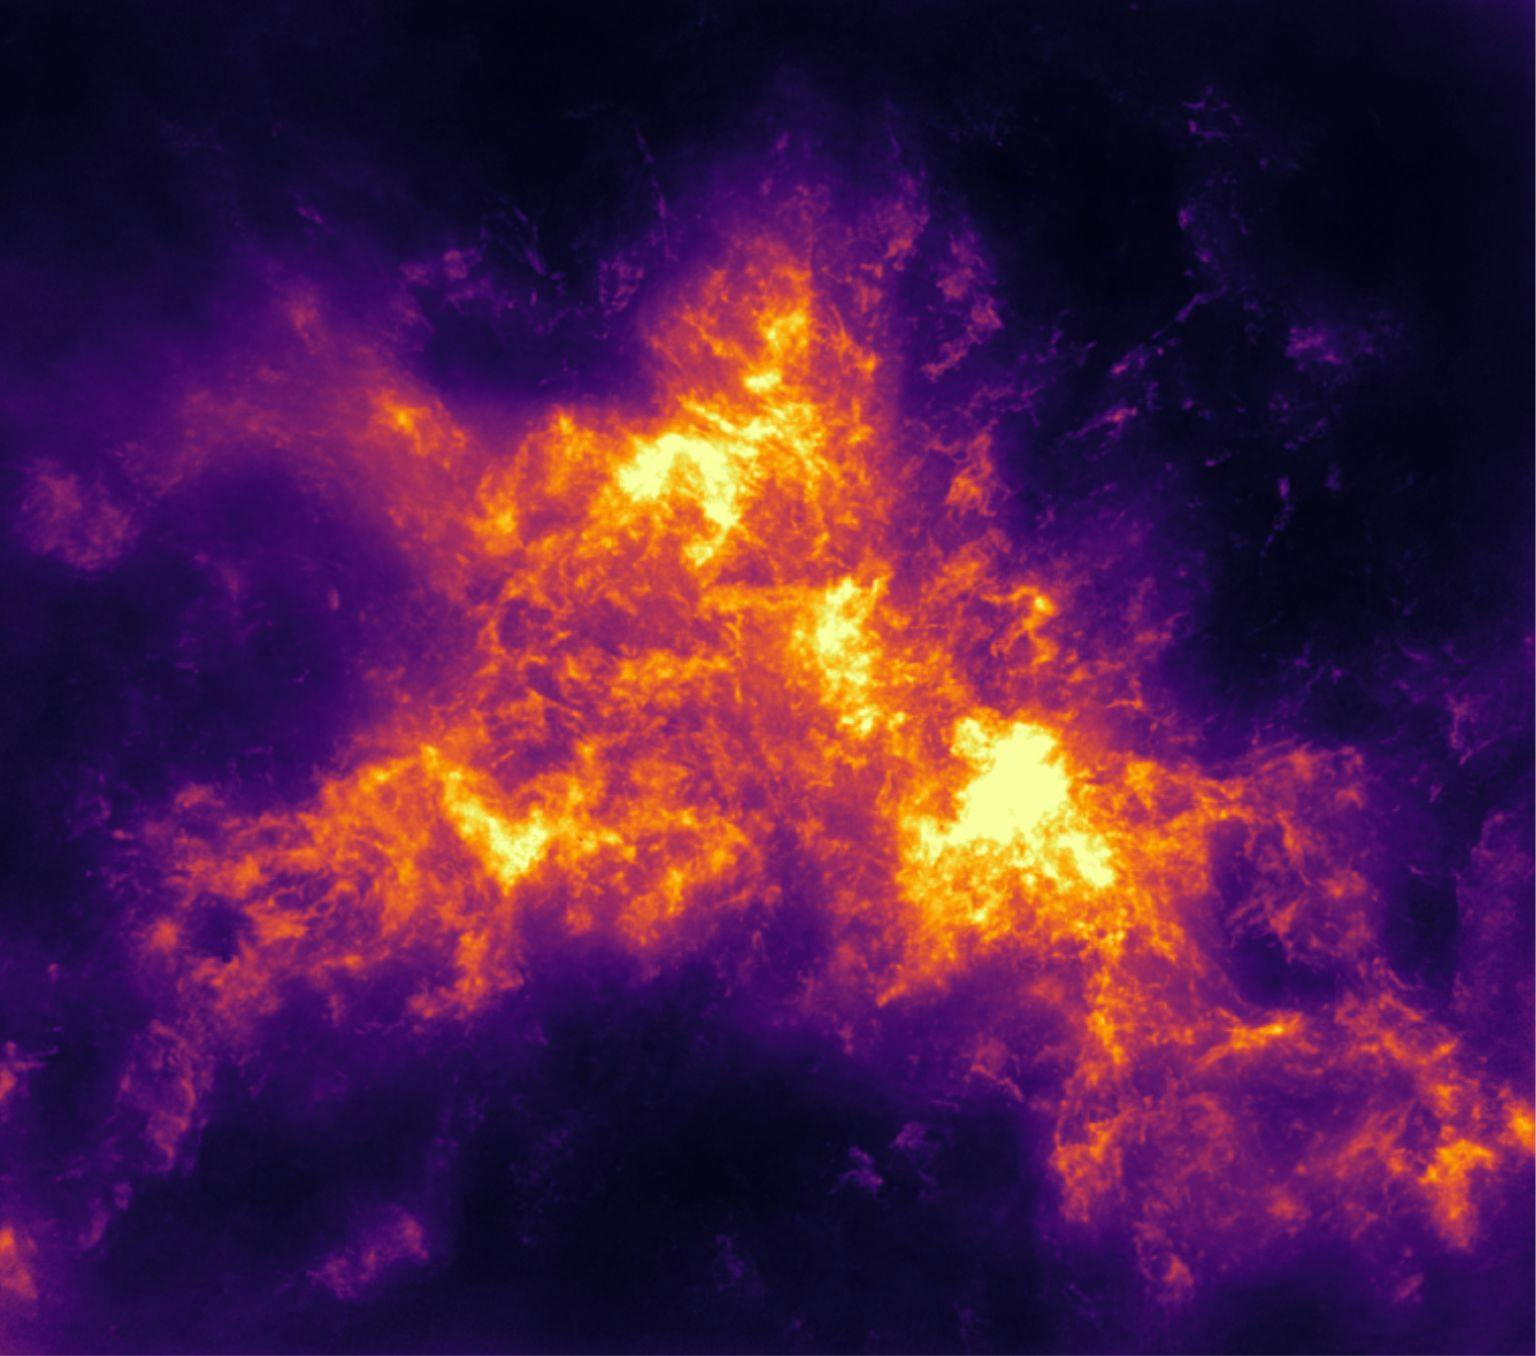 Colourful image showing hydrogen emitted from the Small Magellanic Cloud.